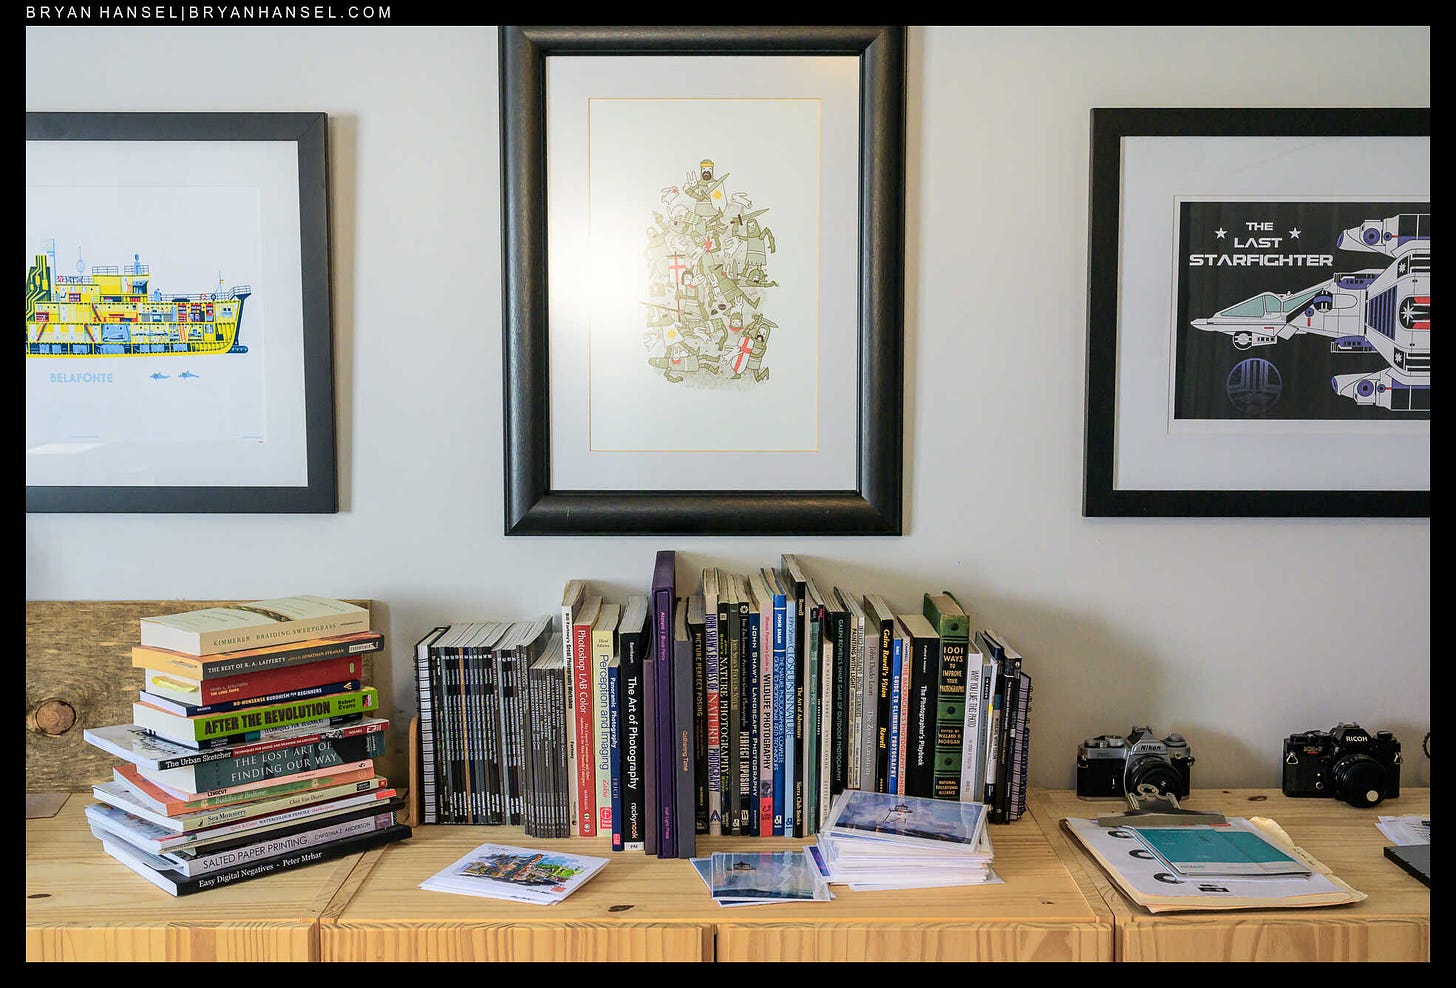 A stack of books next to a stack of books under framed art